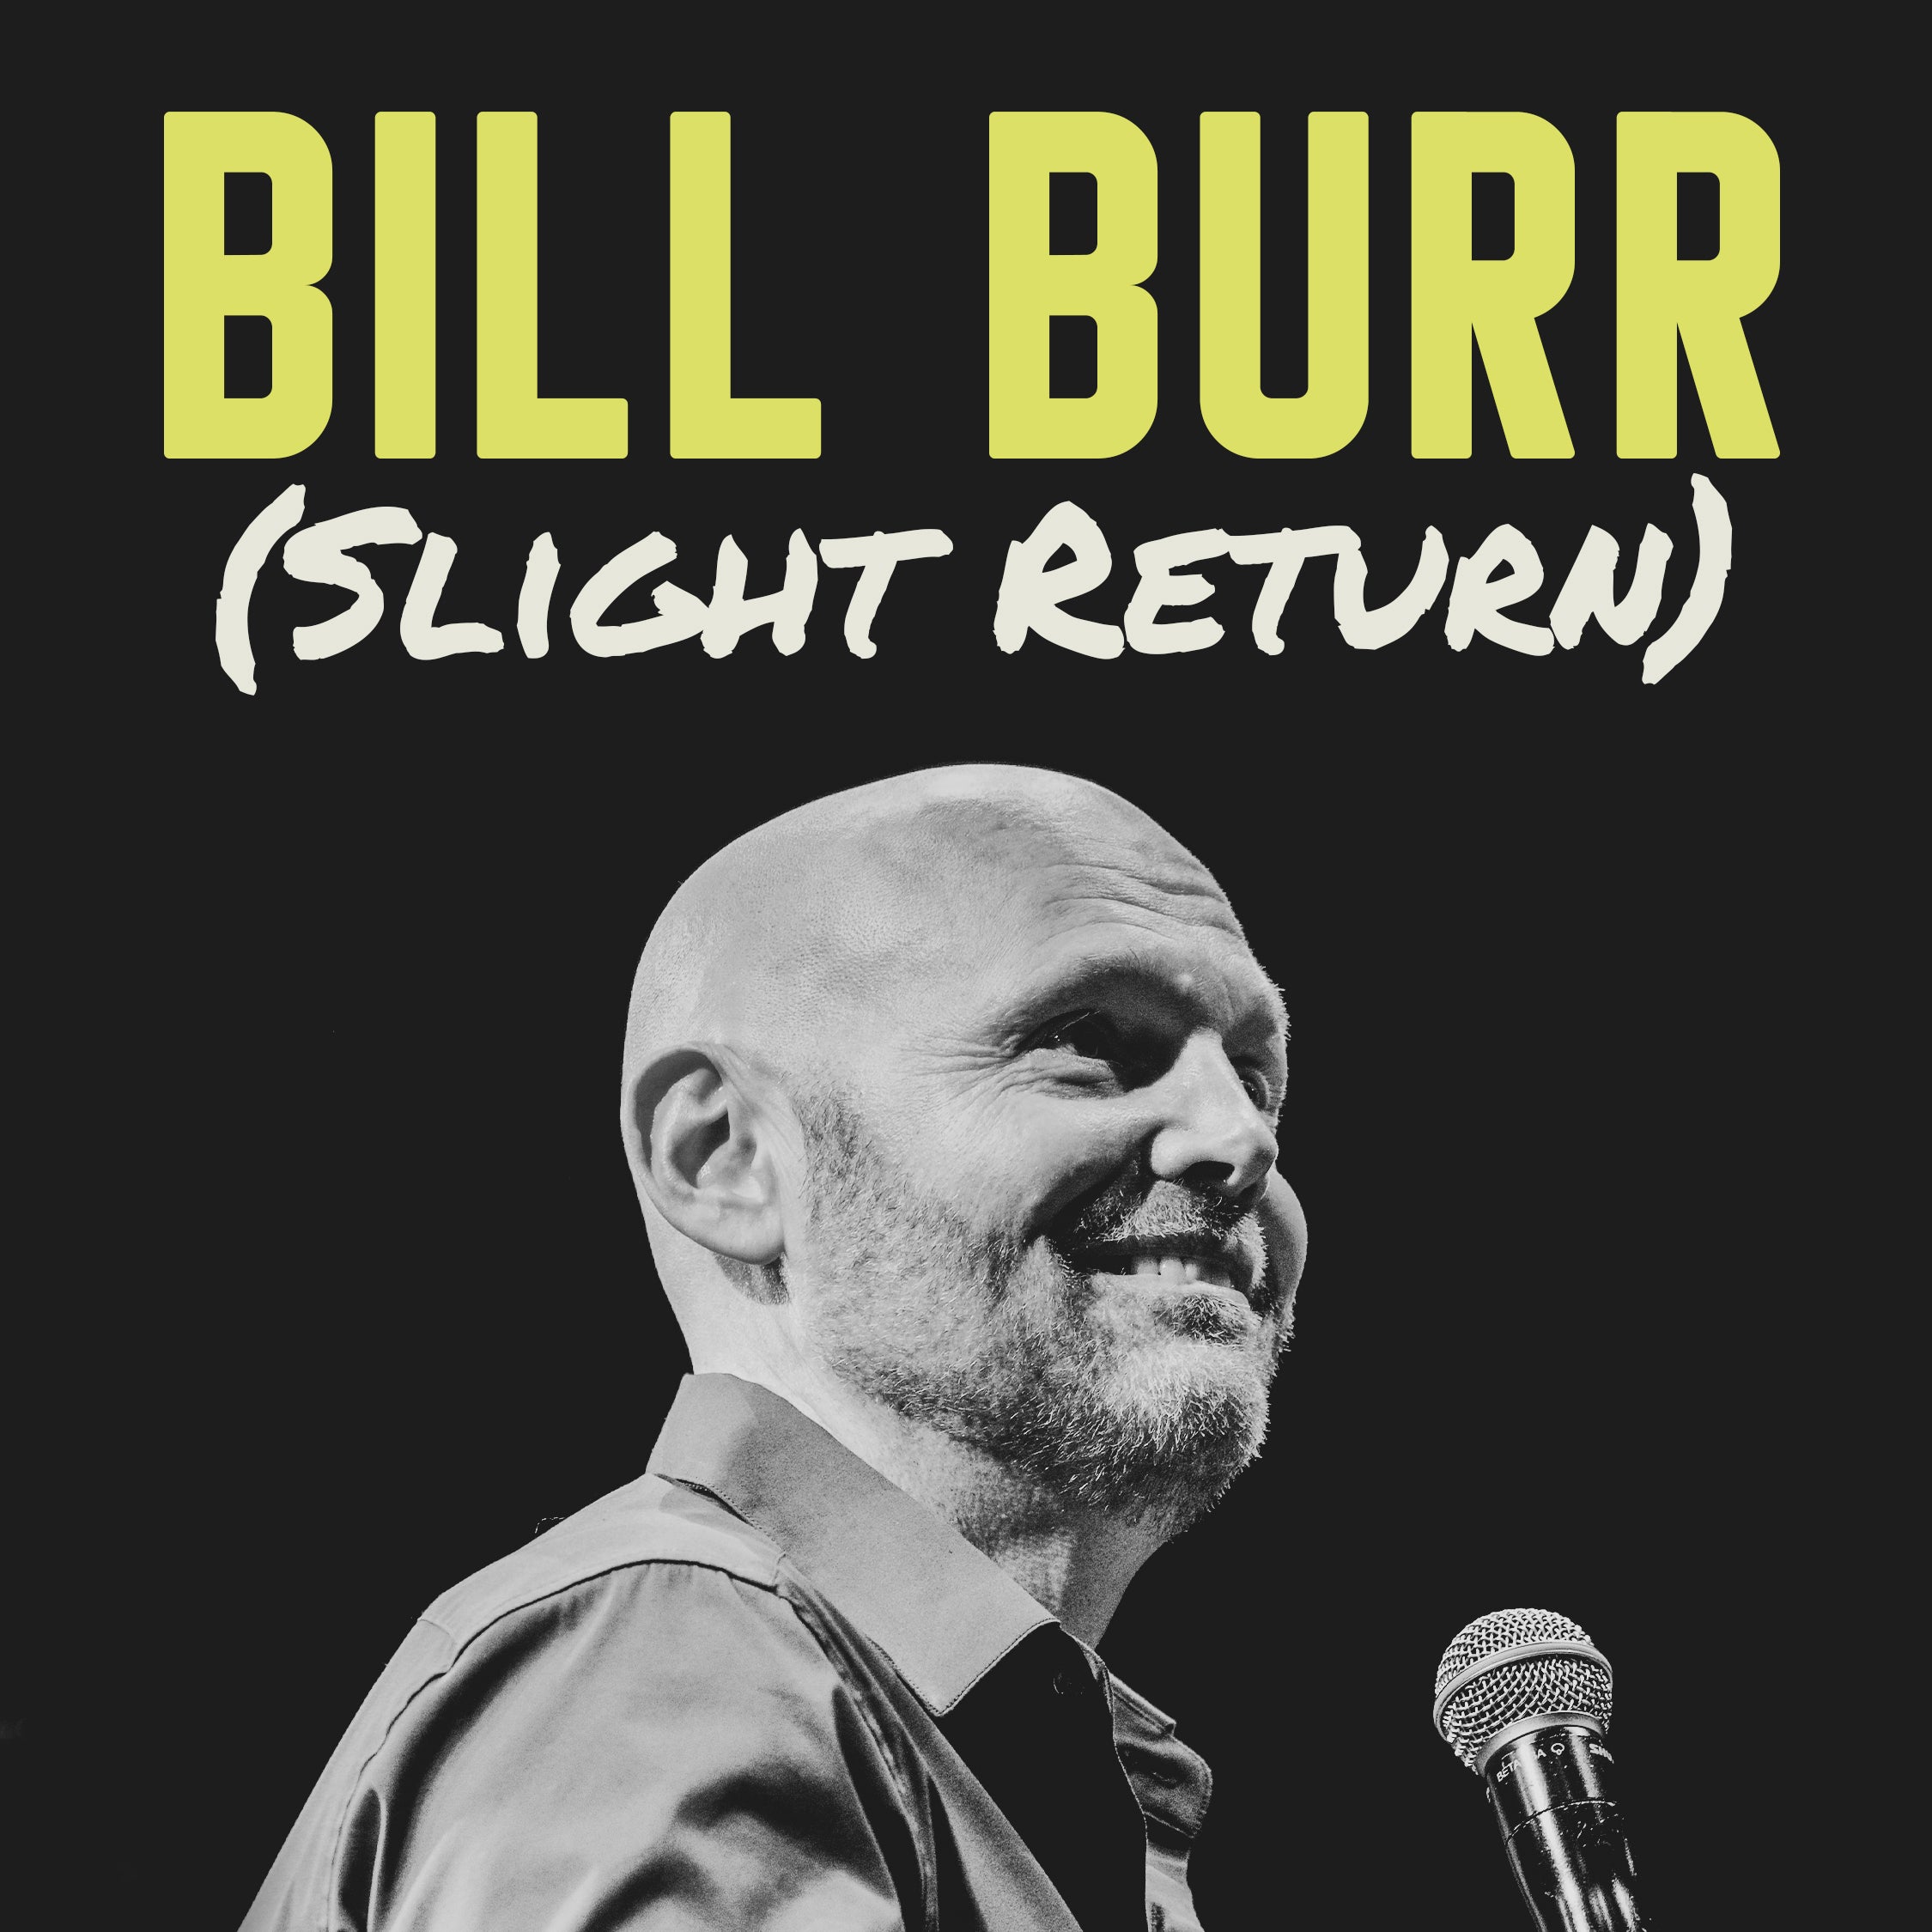 More Info for BILL BURR ANNOUNCES FALL NORTH AMERICAN DATES FOR HIS 2022 ARENA AND AMPHITHEATER TOUR BILL BURR (SLIGHT RETURN)